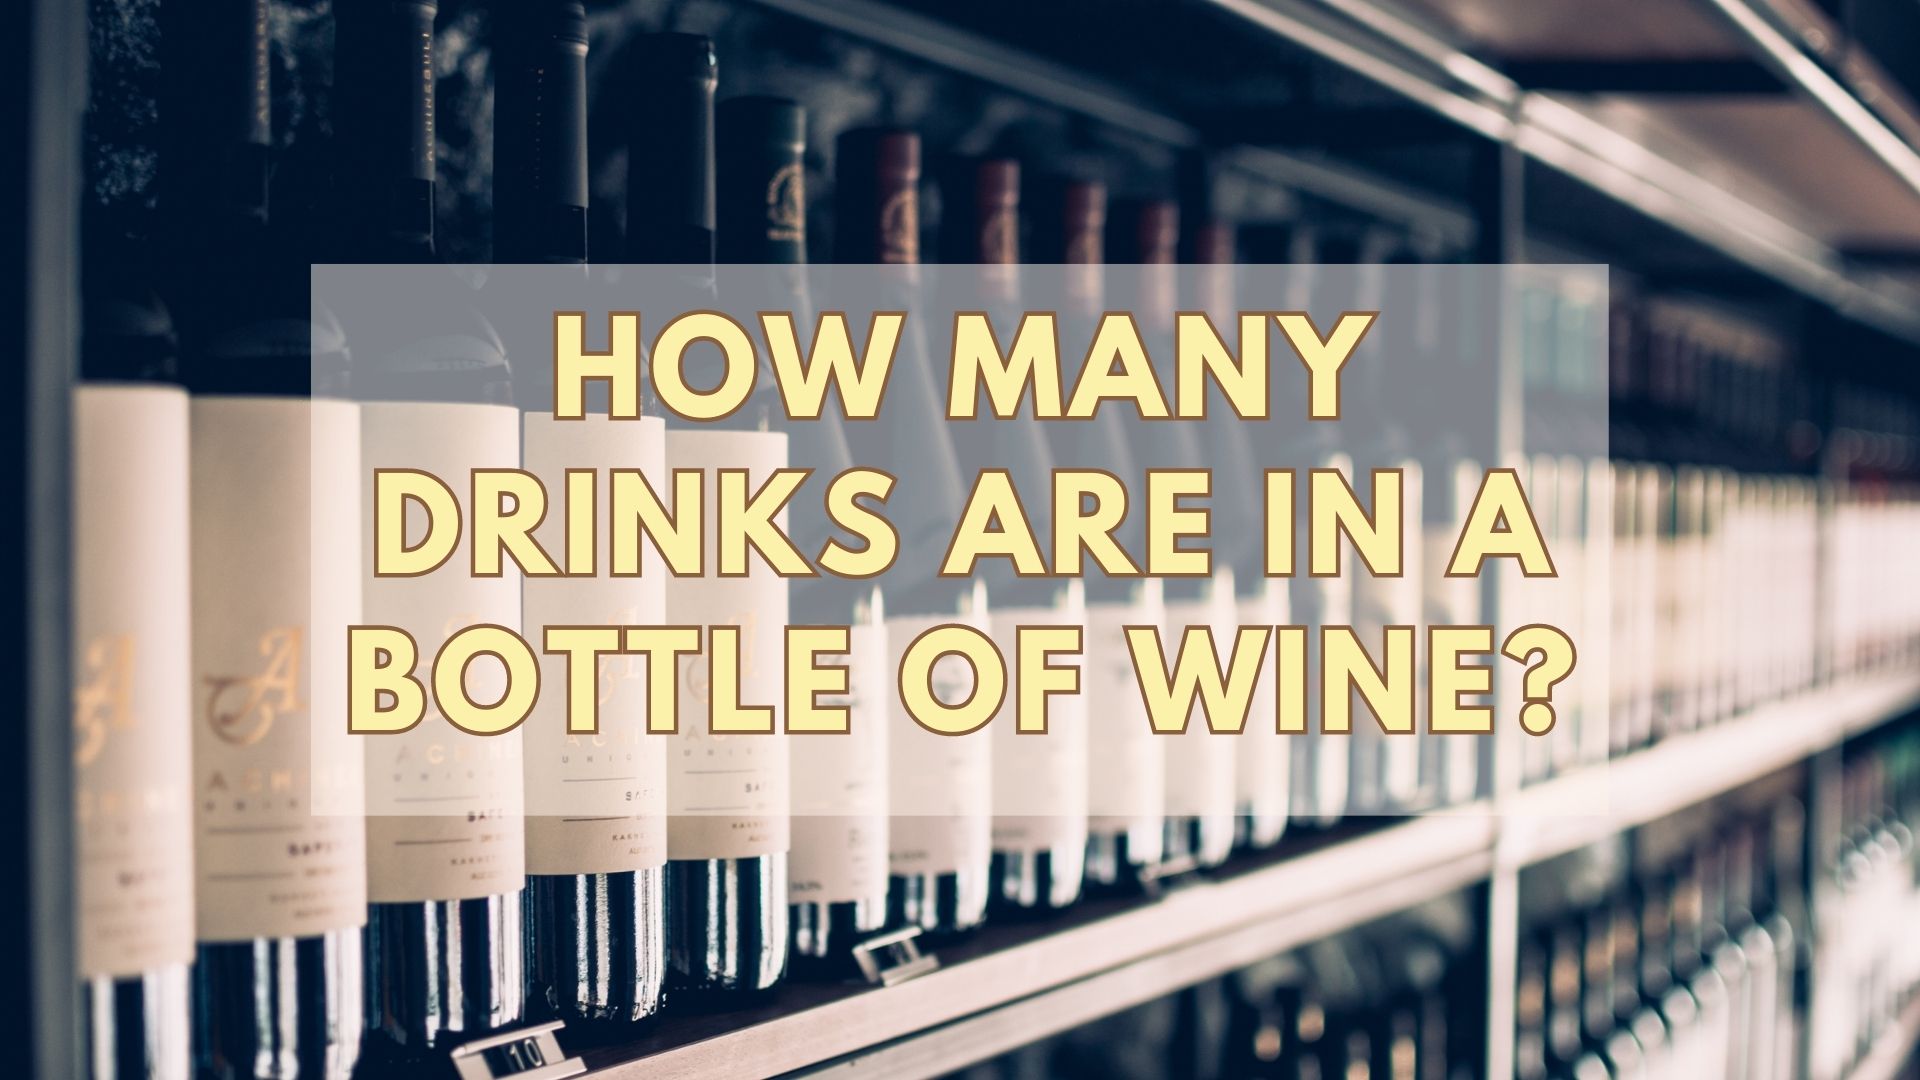 How Many Drinks Are In A Bottle Of Wine